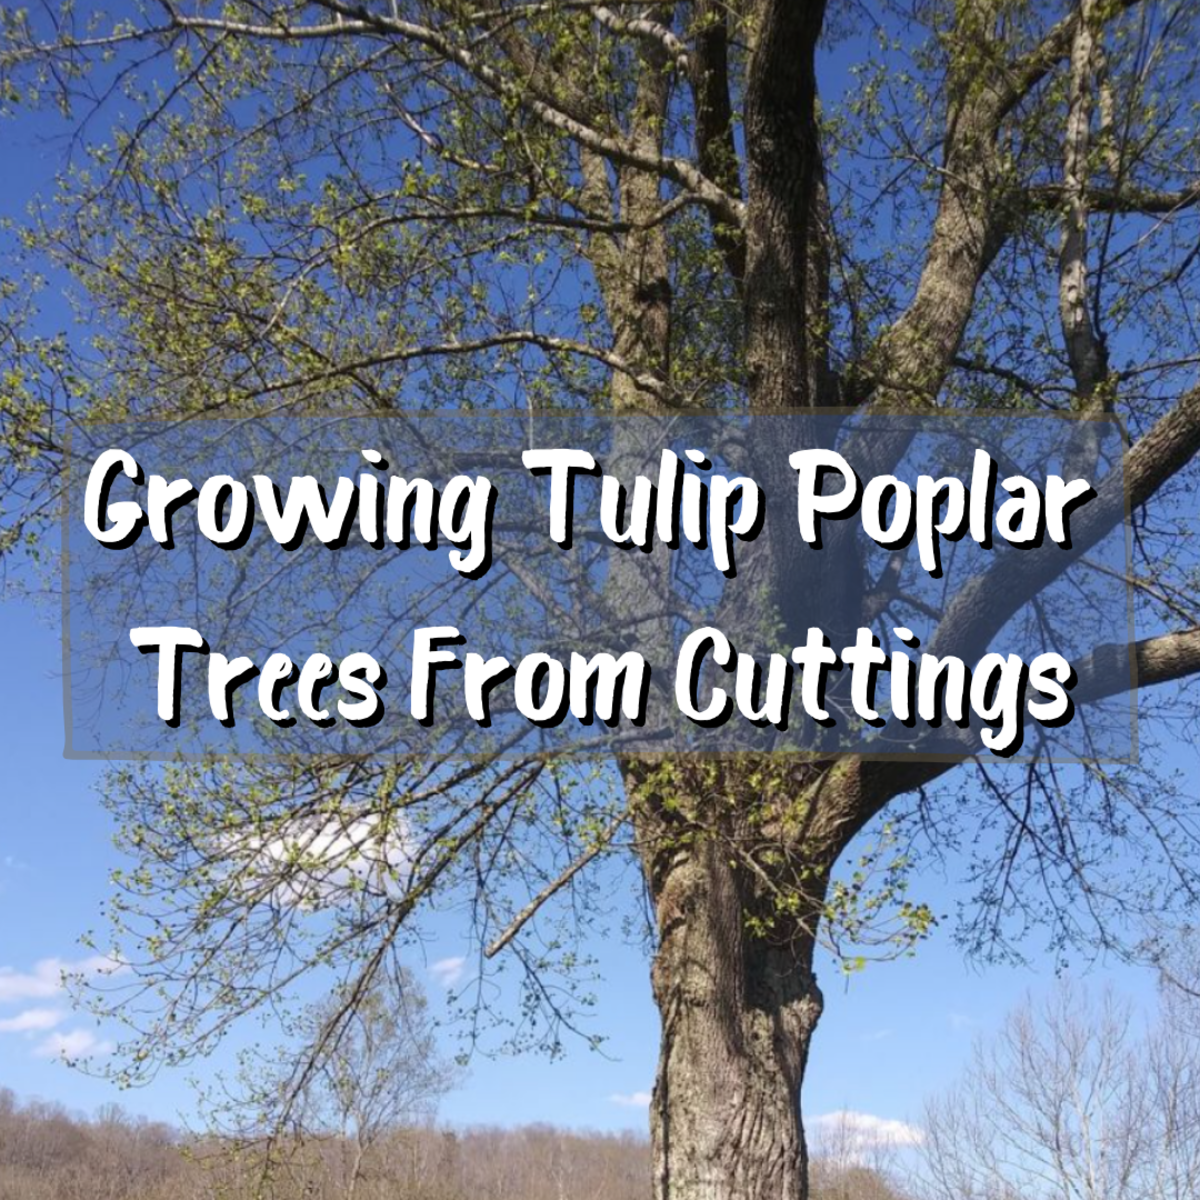 How to Grow Tulip Poplar Trees From Cuttings